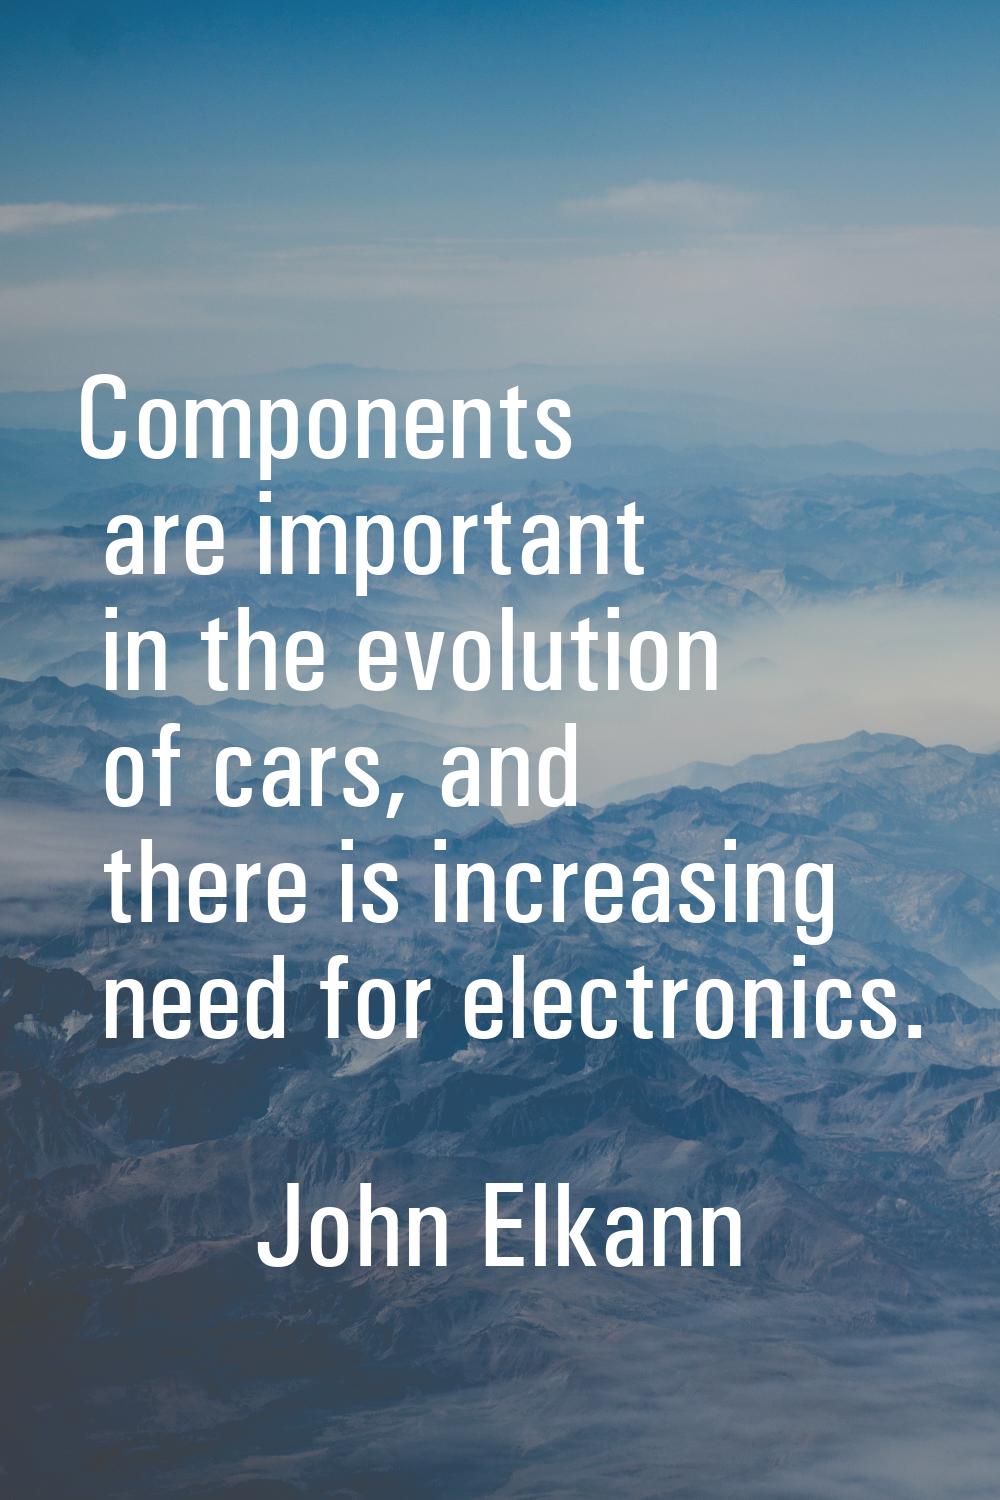 Components are important in the evolution of cars, and there is increasing need for electronics.